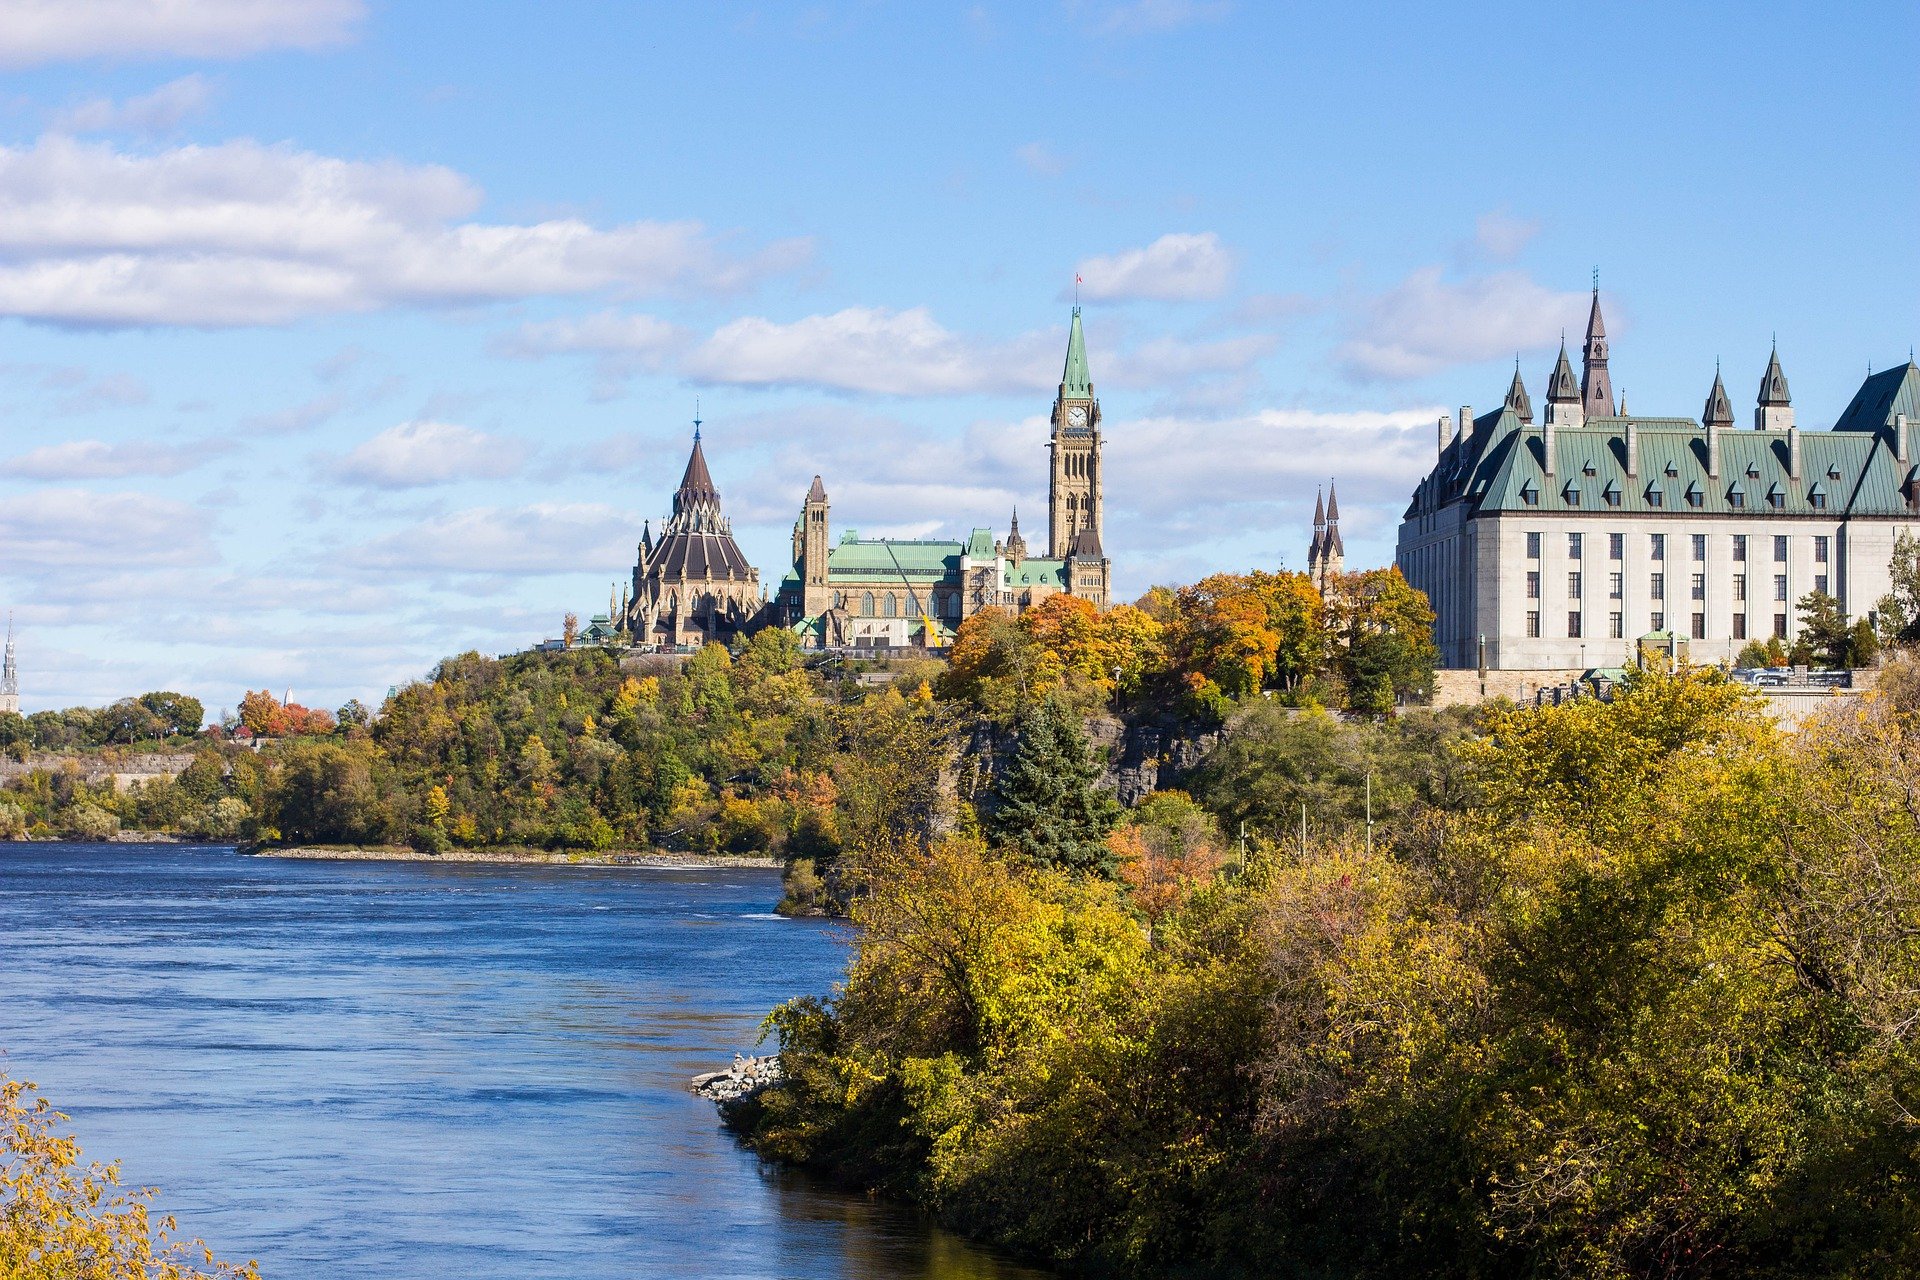 How To Get From Ottawa Airport To City Center - All Possible Ways, cheapest way from Ottawa airport to city center, Ottawa airport to city center, Ottawa Airport Bus To city center, Ottawa airport to city, Ottawa airport to downtown, Ottawa airport to Ottawa